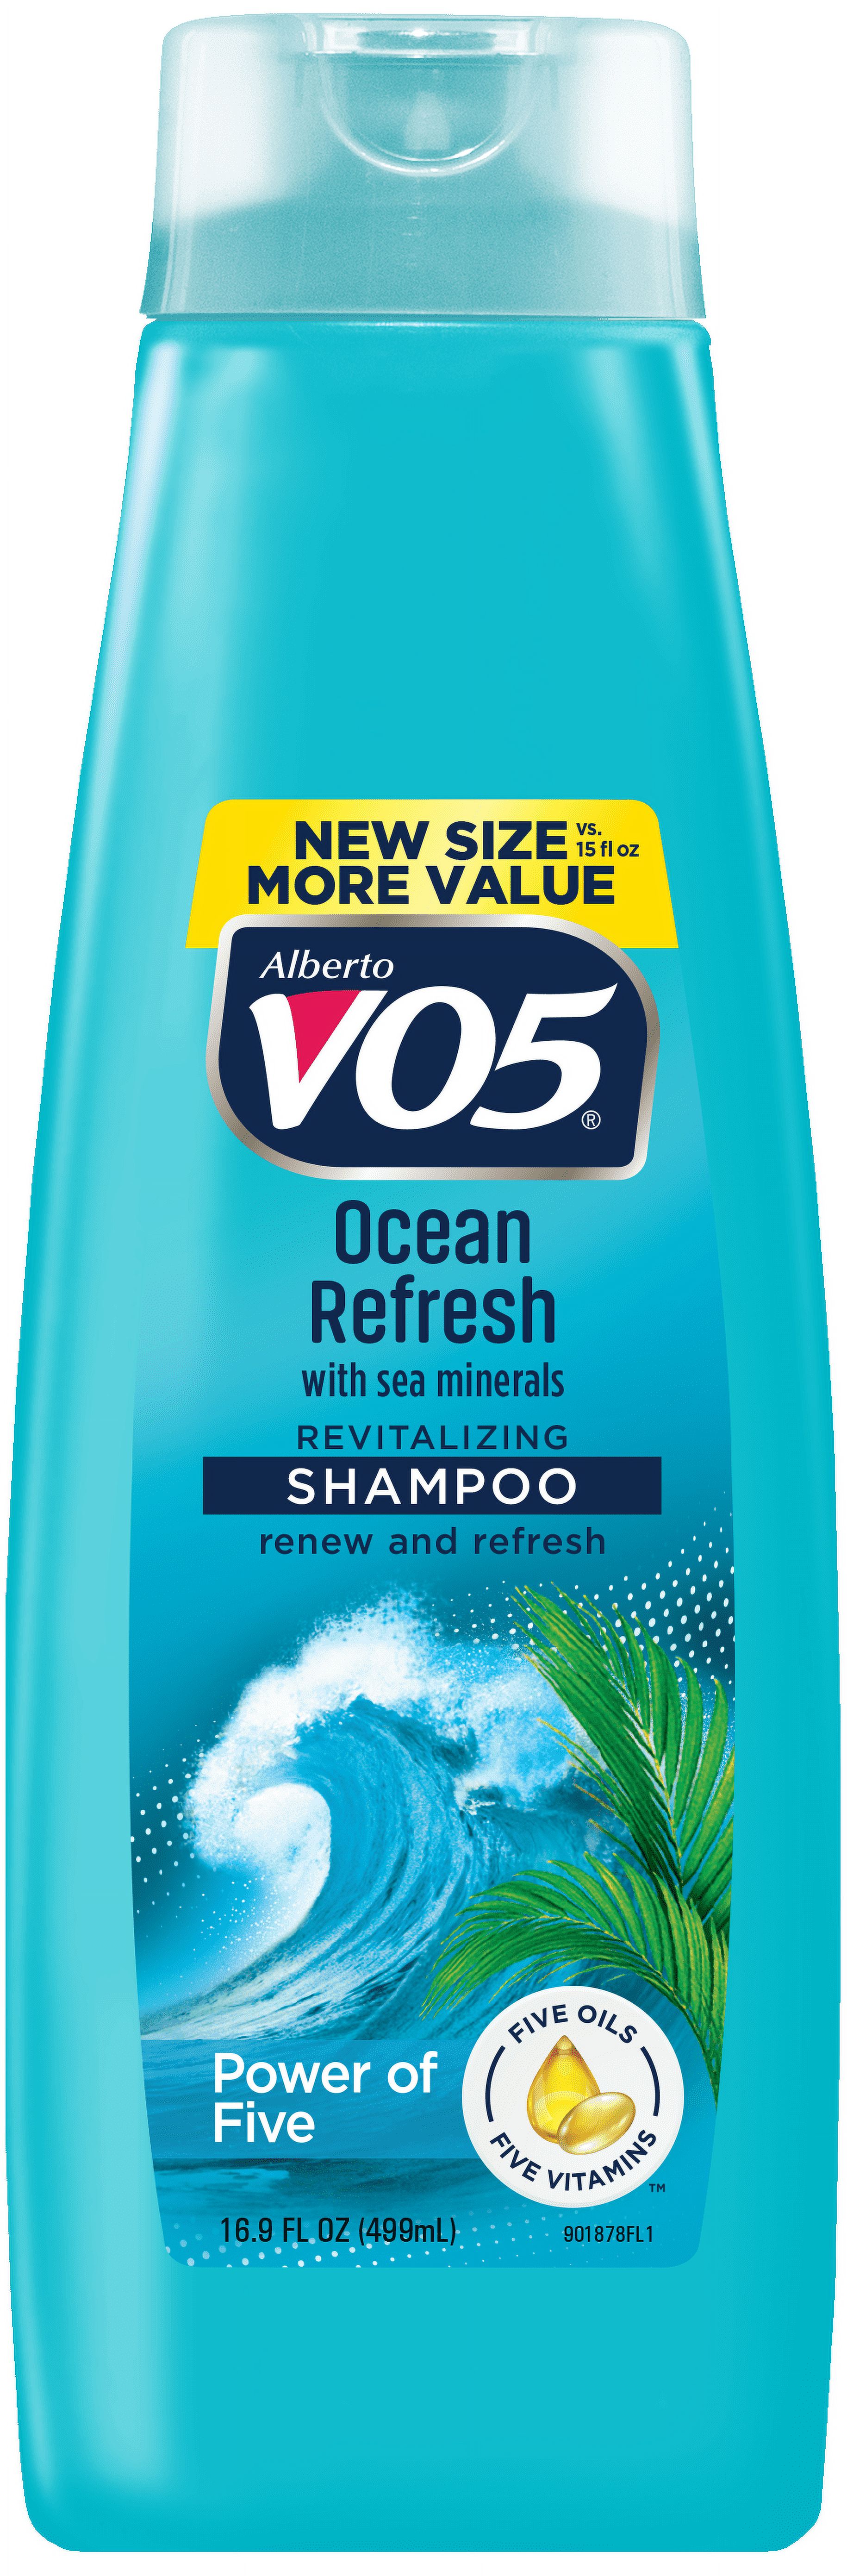 Alberto VO5 Ocean Refresh Revitalizing Shampoo with Sea Minerals, for All Hair Types, 16.9 oz - image 1 of 6